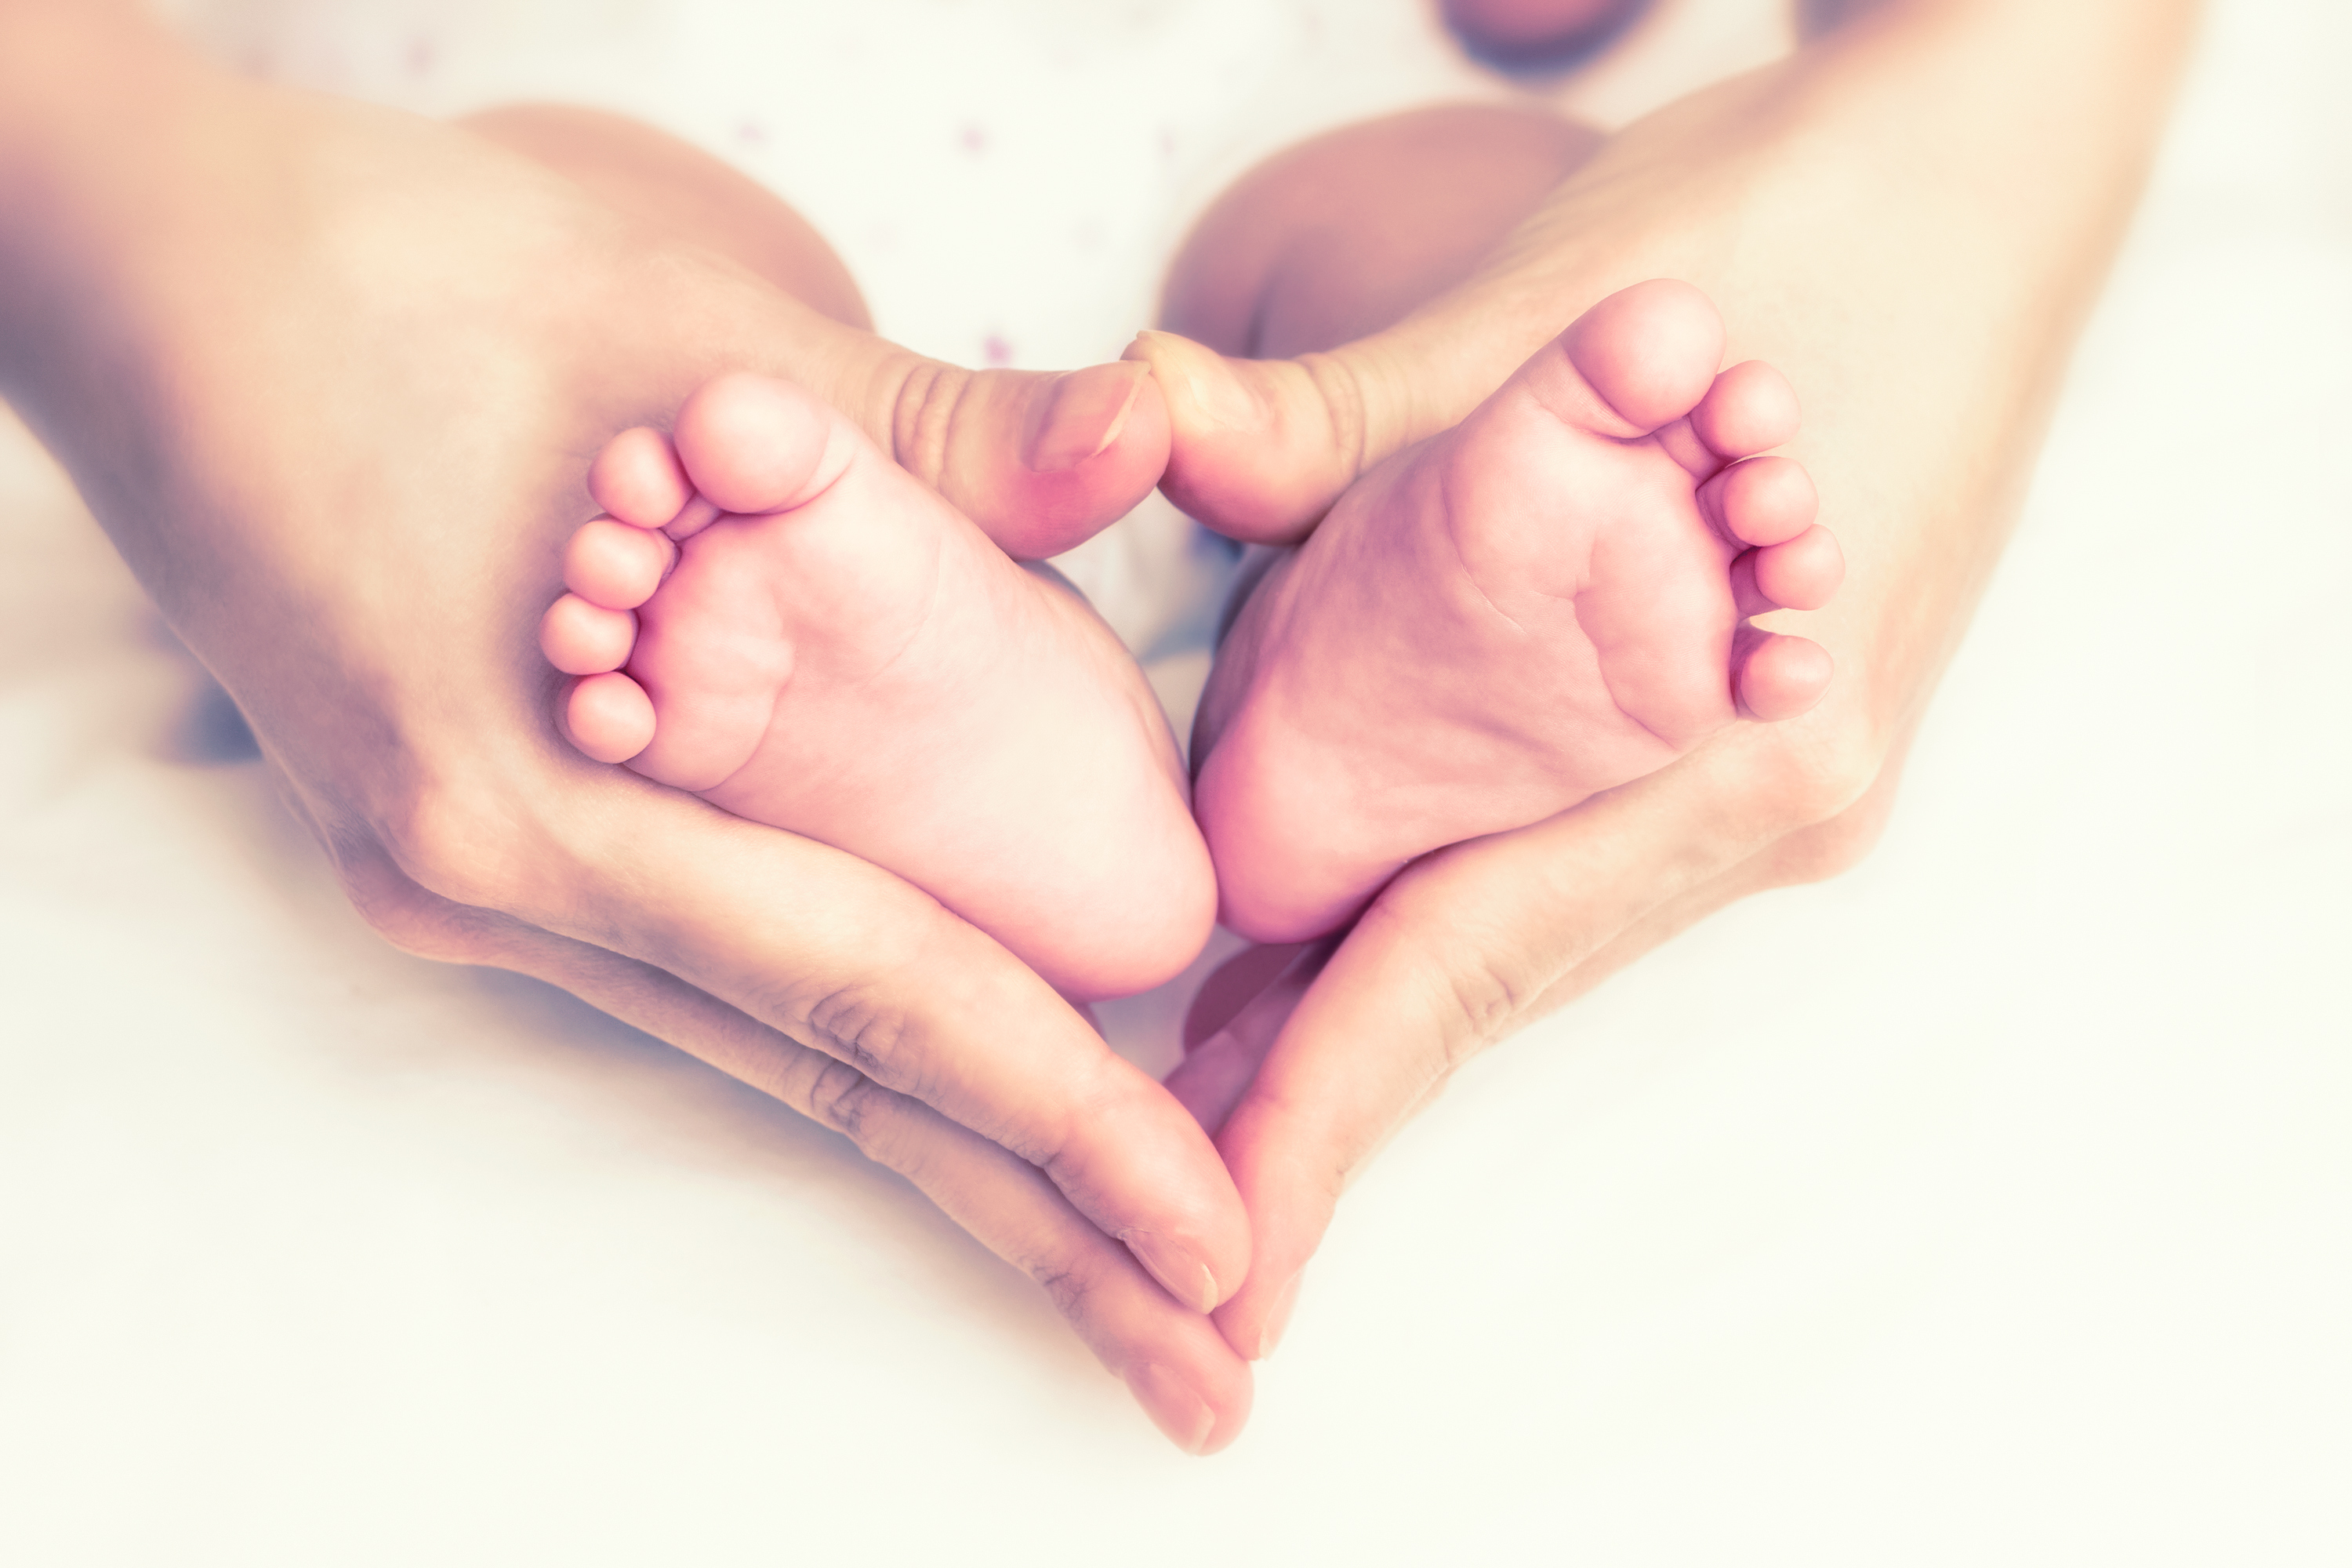 Baby feet in the mother hands - Essendon Natural Health